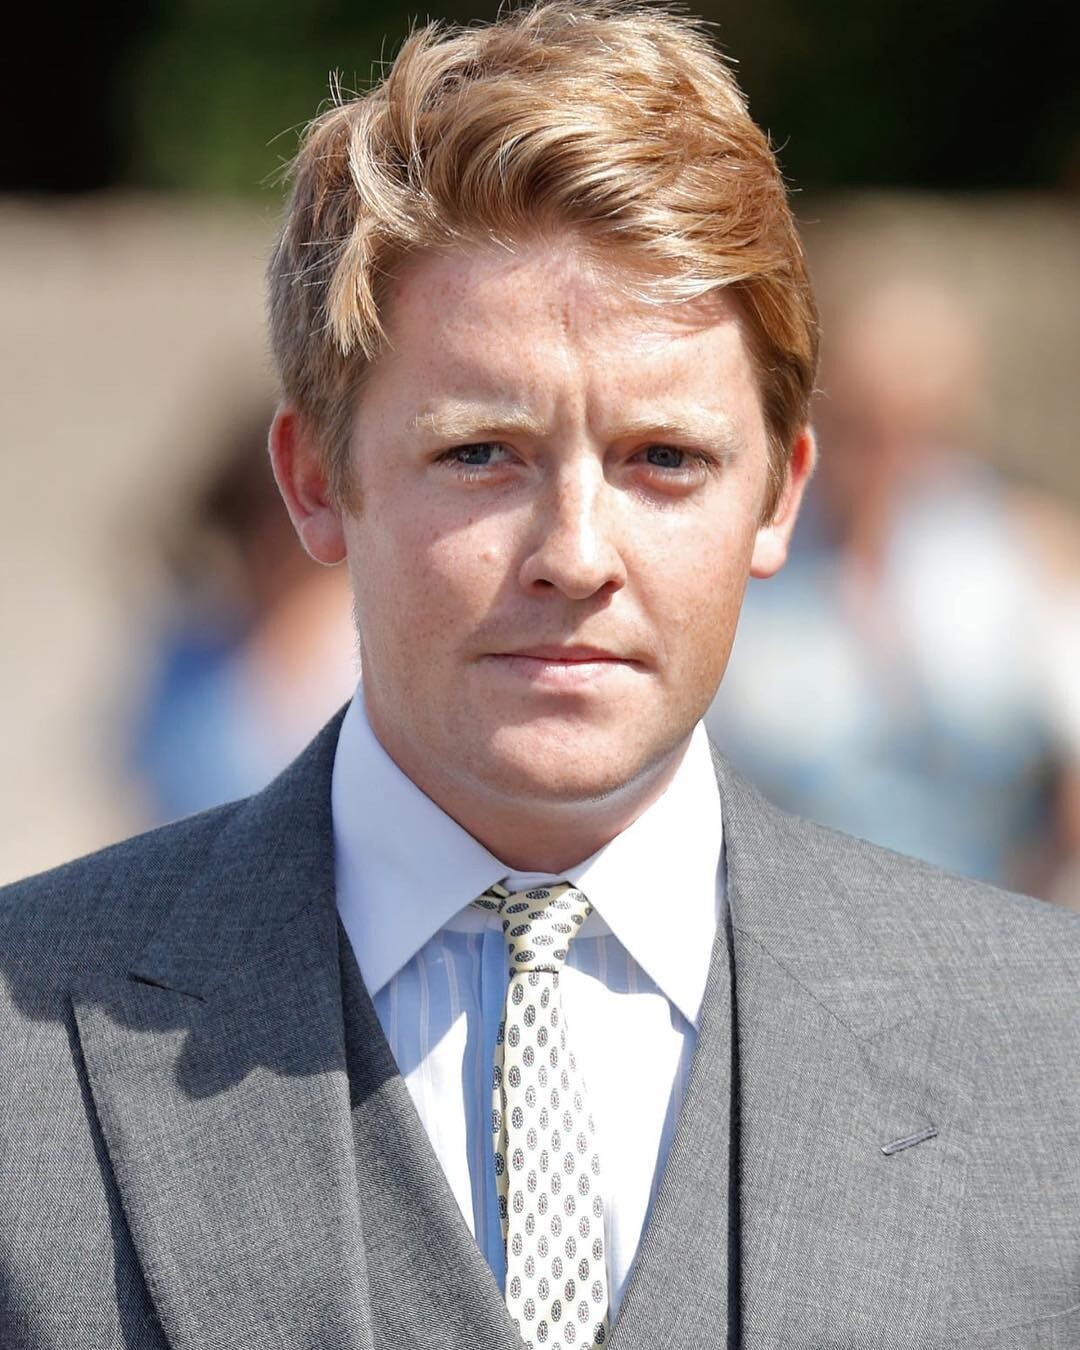 Duke of Westminster Hugh Grosvenor is richer than Queen Elizabeth and has donated US$15 million to the UK’s National Health Service, to research and development and children’s food charities to help combat Covid-19. Photo: @alltheroyalsoftheworld/Instagram